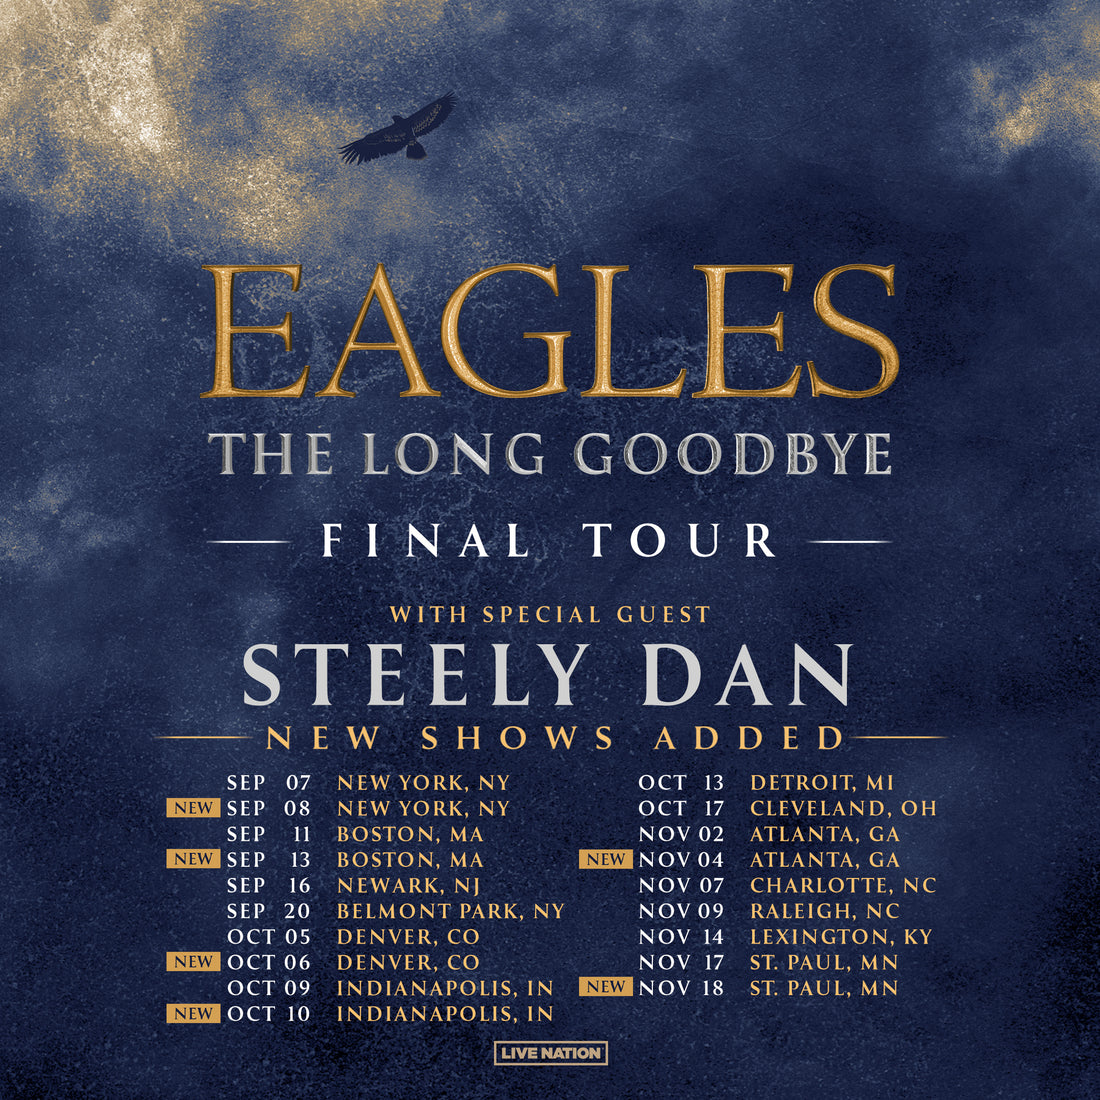 New Dates Added to The Long Goodbye Tour – Eagles